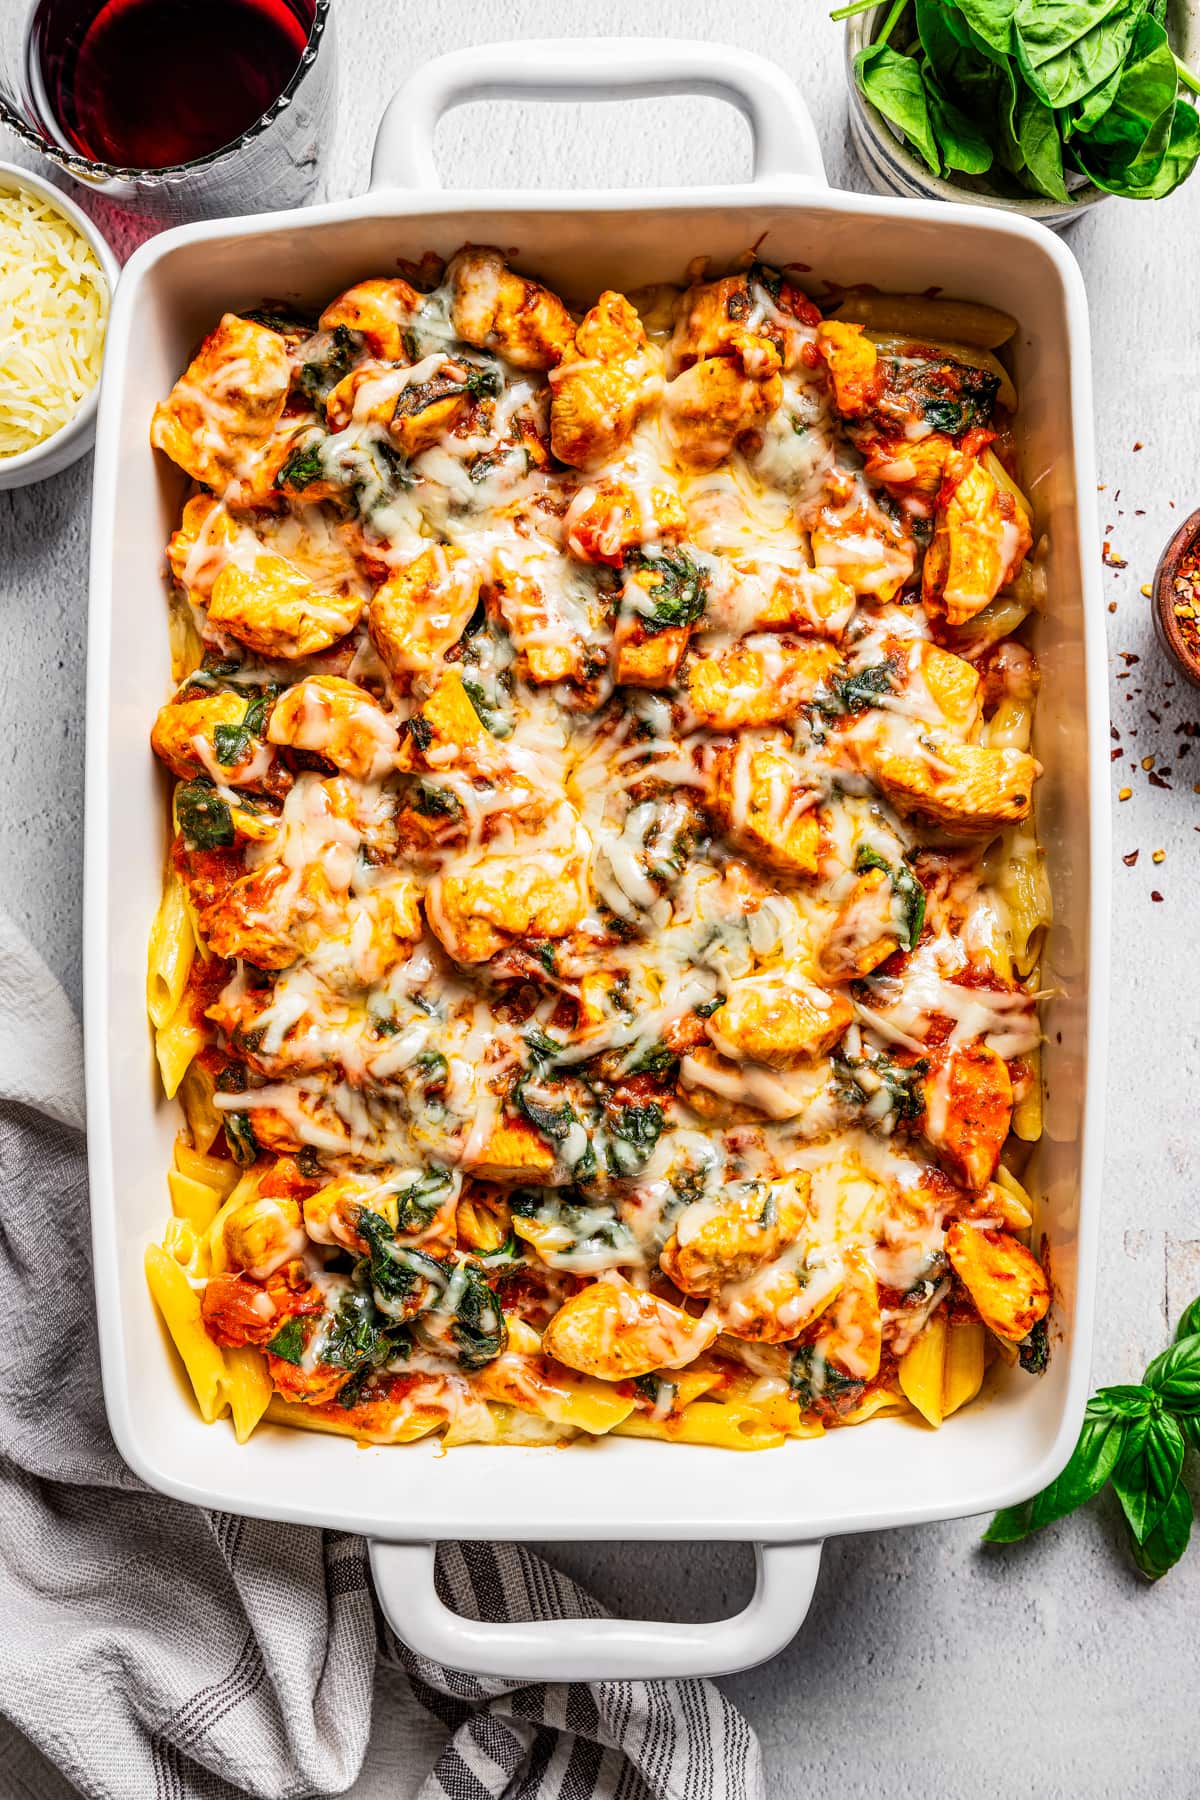 Overhead view of a chicken pasta bake in a casserole dish.